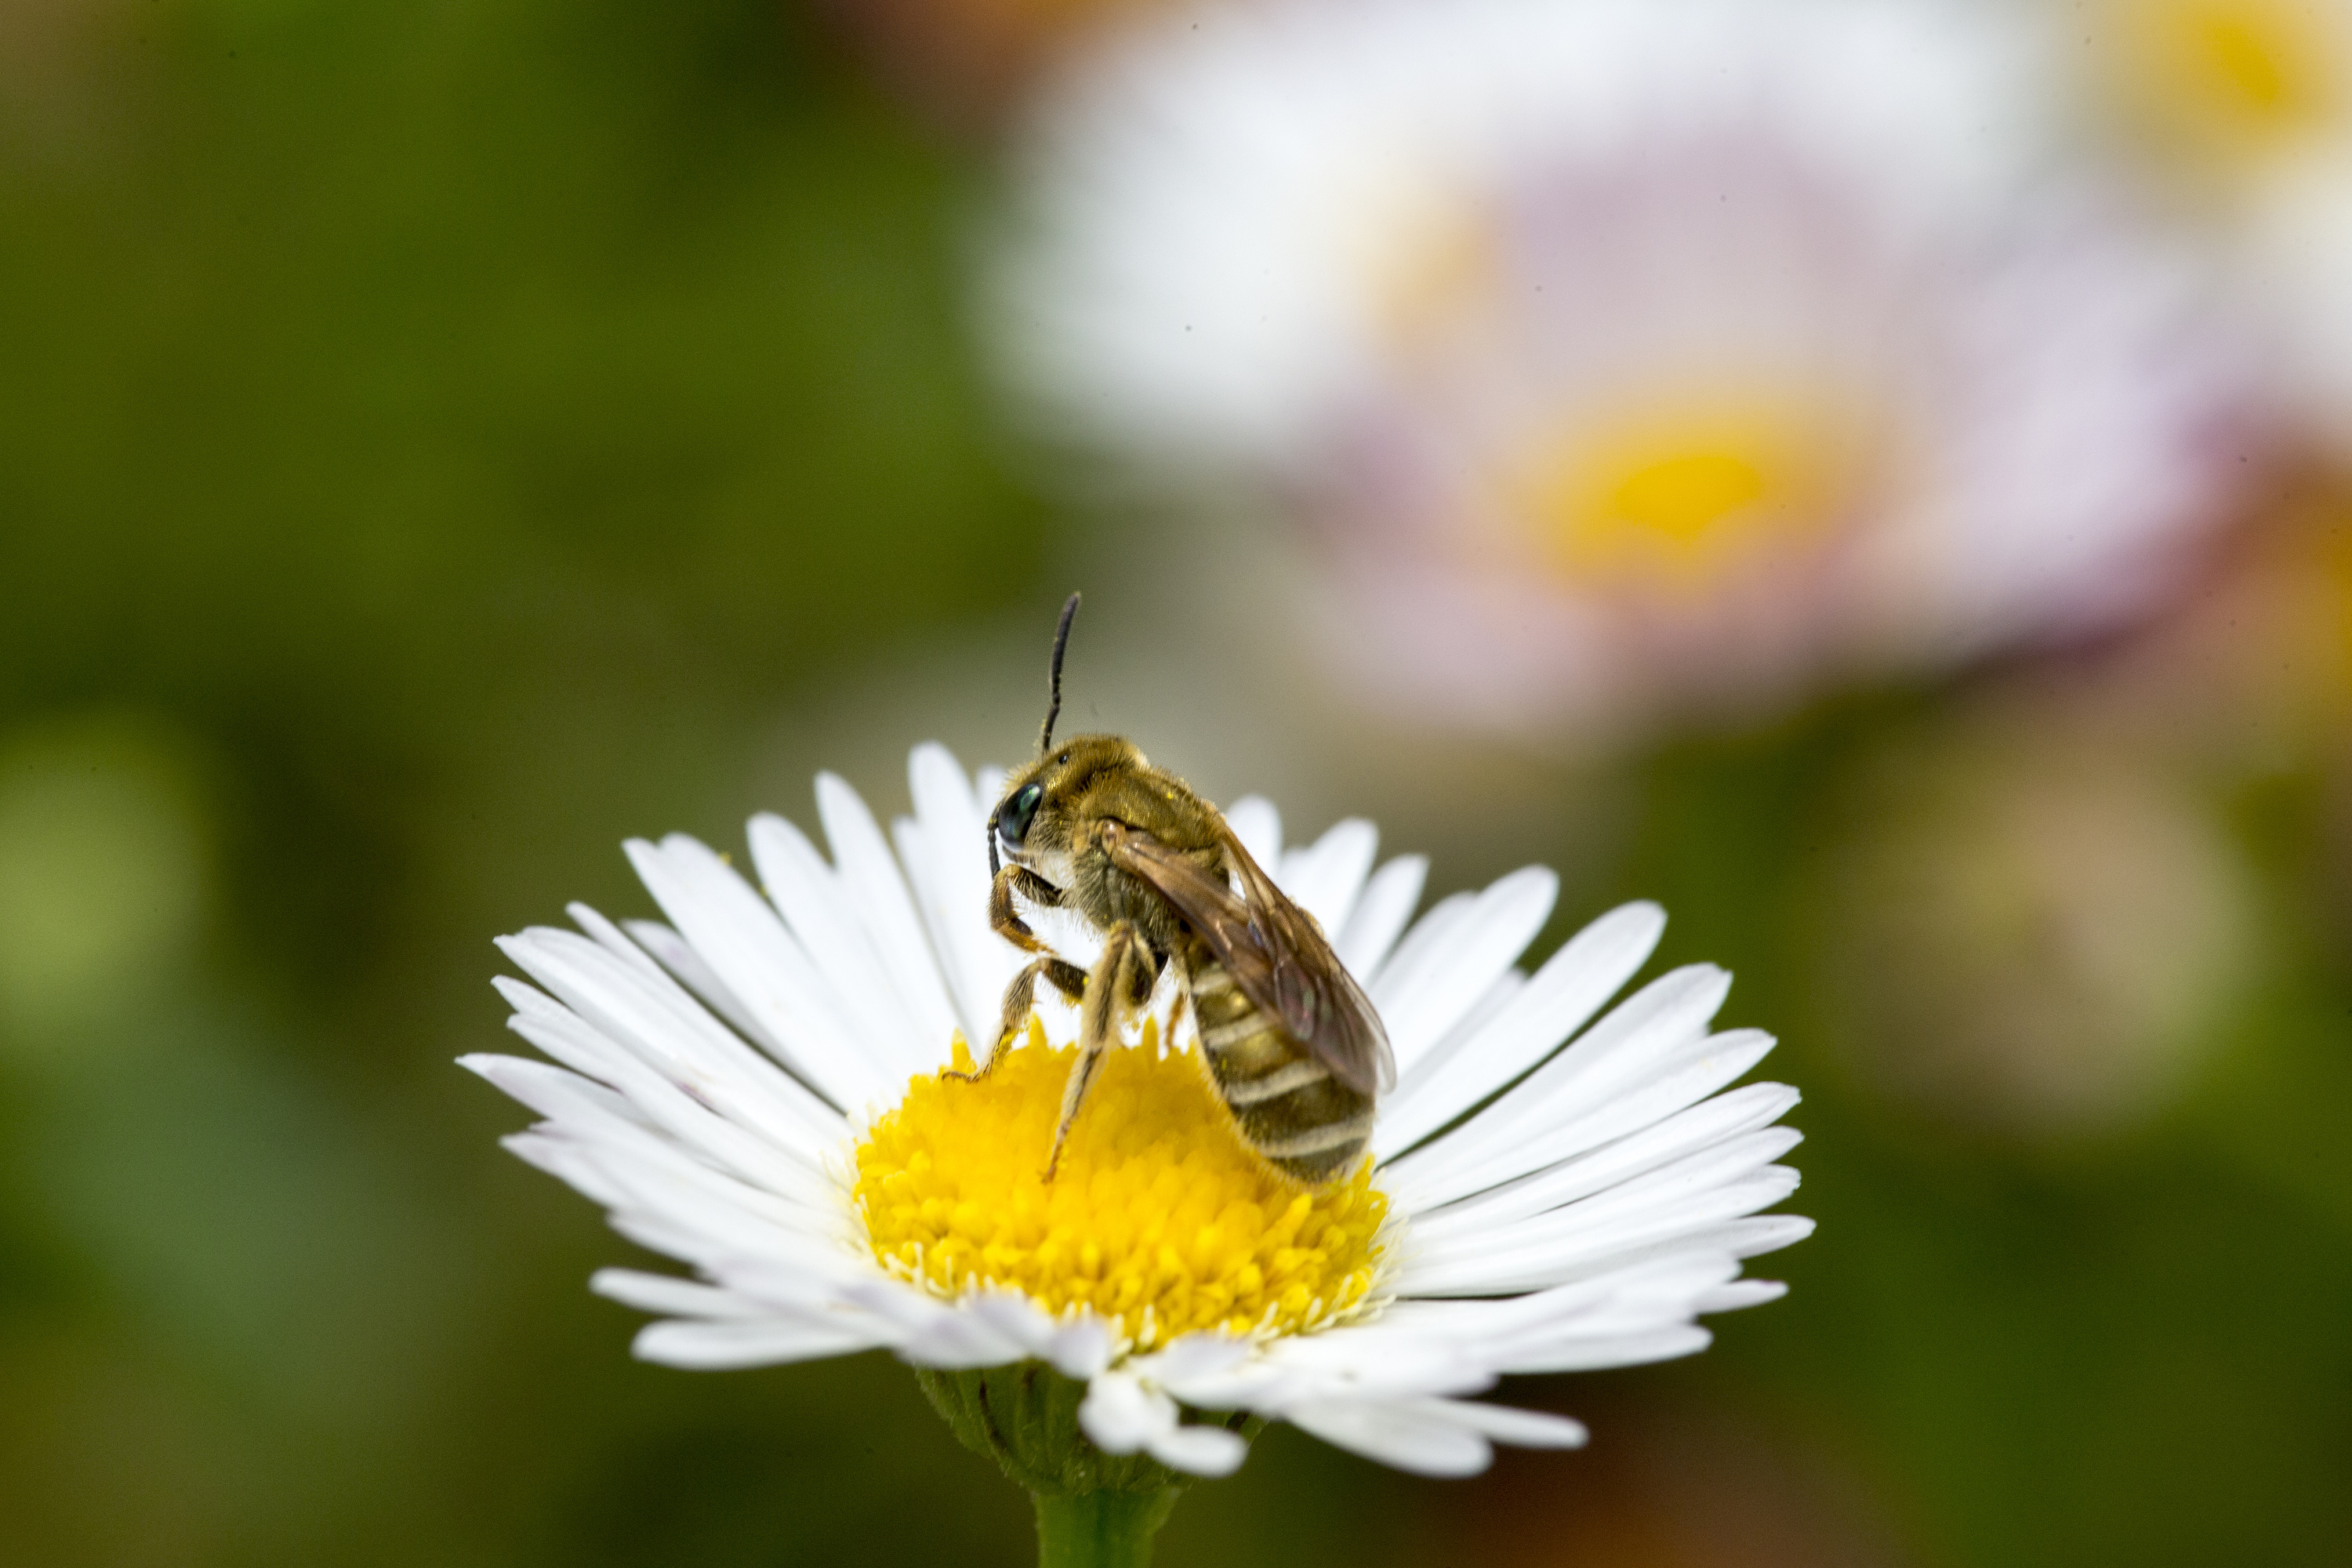 Global Action on Pollination Services